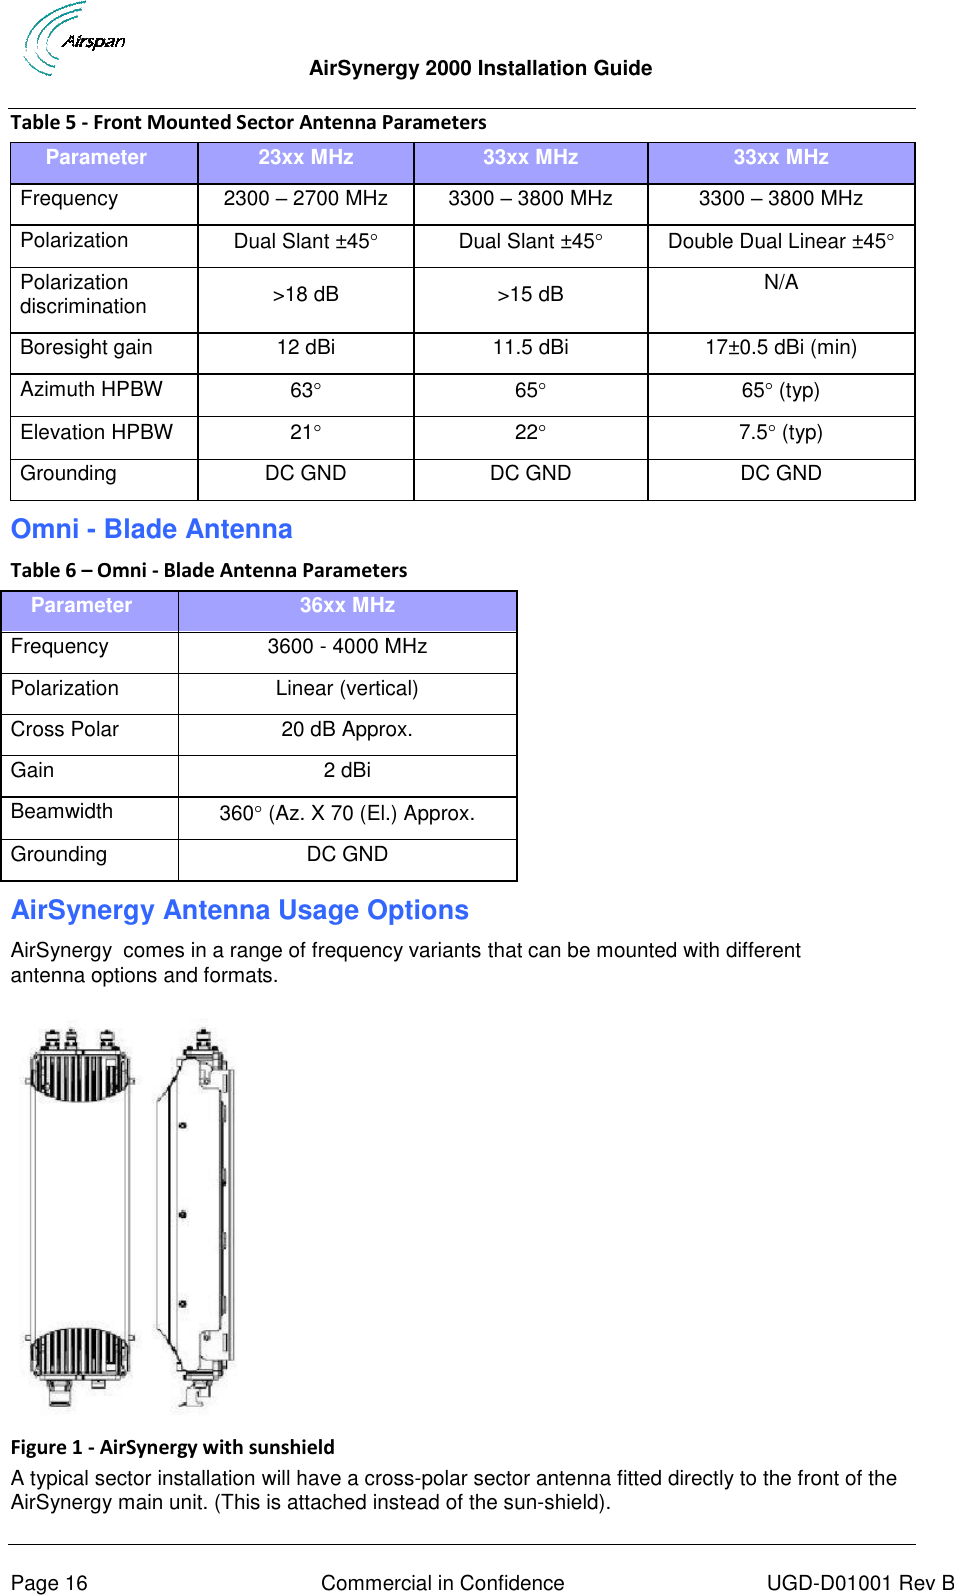  AirSynergy 2000 Installation Guide     Page 16  Commercial in Confidence  UGD-D01001 Rev B Table 5 - Front Mounted Sector Antenna Parameters Parameter 23xx MHz 33xx MHz 33xx MHz Frequency 2300 – 2700 MHz 3300 – 3800 MHz 3300 – 3800 MHz Polarization Dual Slant ±45 Dual Slant ±45 Double Dual Linear ±45 Polarization discrimination &gt;18 dB &gt;15 dB N/A Boresight gain 12 dBi 11.5 dBi 17±0.5 dBi (min) Azimuth HPBW 63 65 65 (typ) Elevation HPBW 21 22 7.5 (typ) Grounding DC GND DC GND DC GND Omni - Blade Antenna Table 6 – Omni - Blade Antenna Parameters Parameter 36xx MHz Frequency 3600 - 4000 MHz Polarization Linear (vertical) Cross Polar 20 dB Approx. Gain 2 dBi Beamwidth 360 (Az. X 70 (El.) Approx. Grounding DC GND AirSynergy Antenna Usage Options AirSynergy  comes in a range of frequency variants that can be mounted with different antenna options and formats.  Figure 1 - AirSynergy with sunshield A typical sector installation will have a cross-polar sector antenna fitted directly to the front of the AirSynergy main unit. (This is attached instead of the sun-shield). 